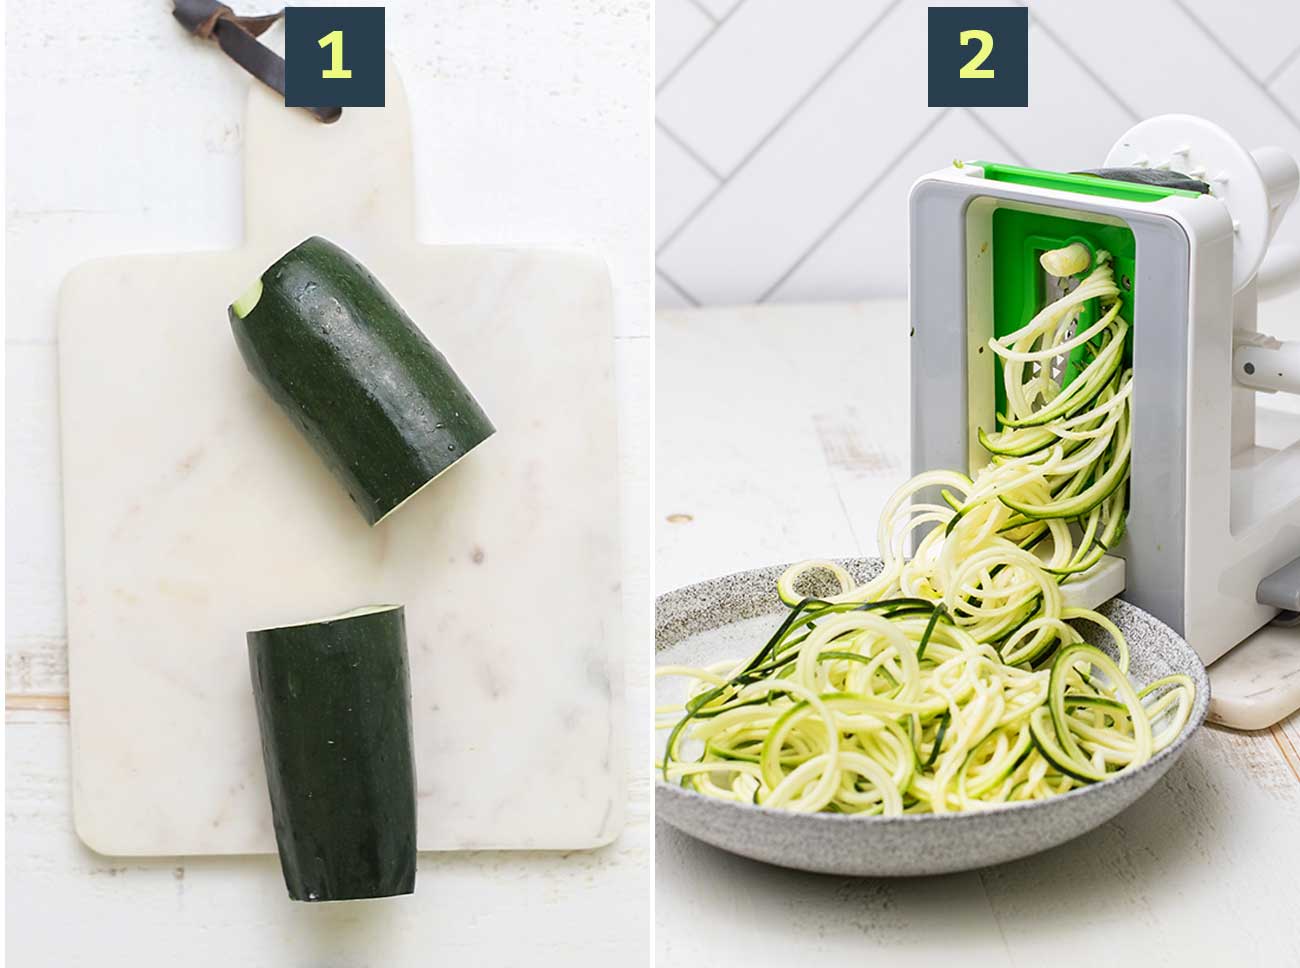 https://blissfullylowcarb.com/wp-content/uploads/2022/09/STEPS-1-AND-2-spiralizer.jpg